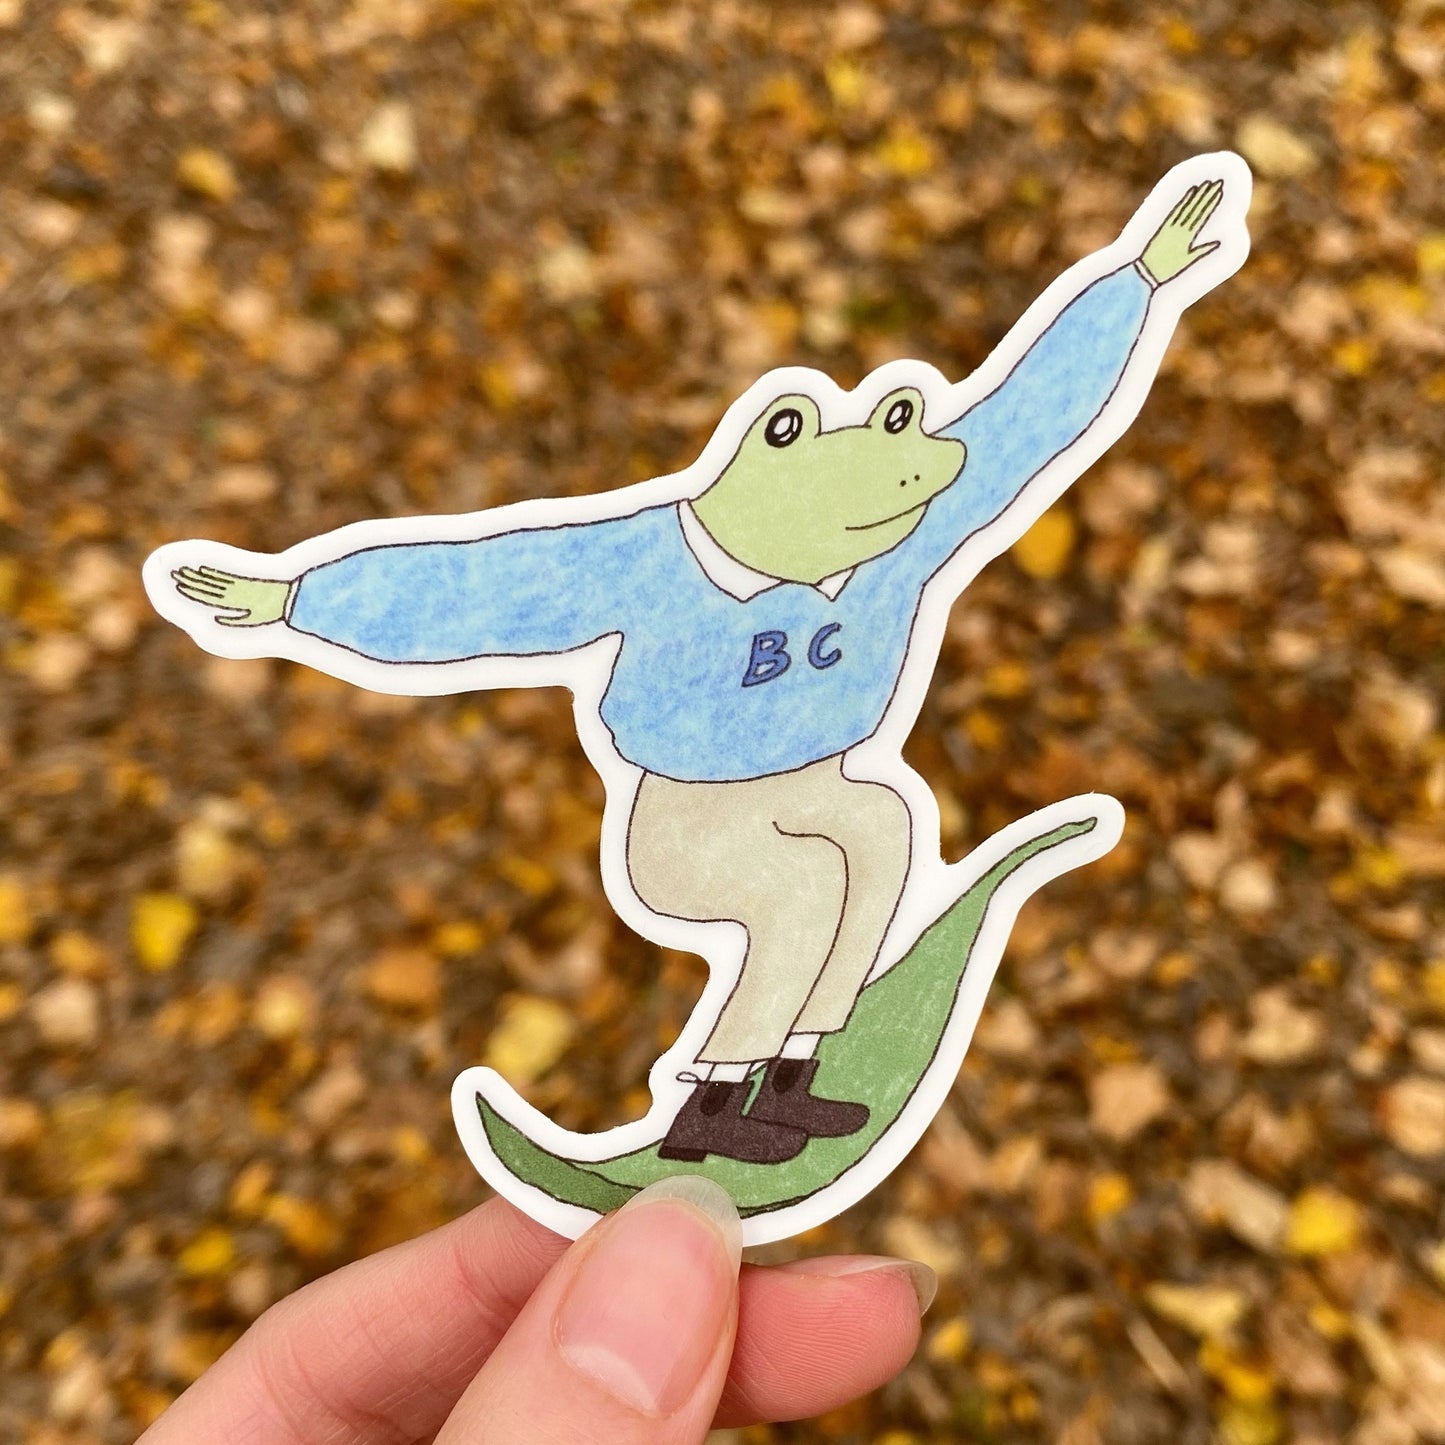 The Surfing Frog in BC Sticker